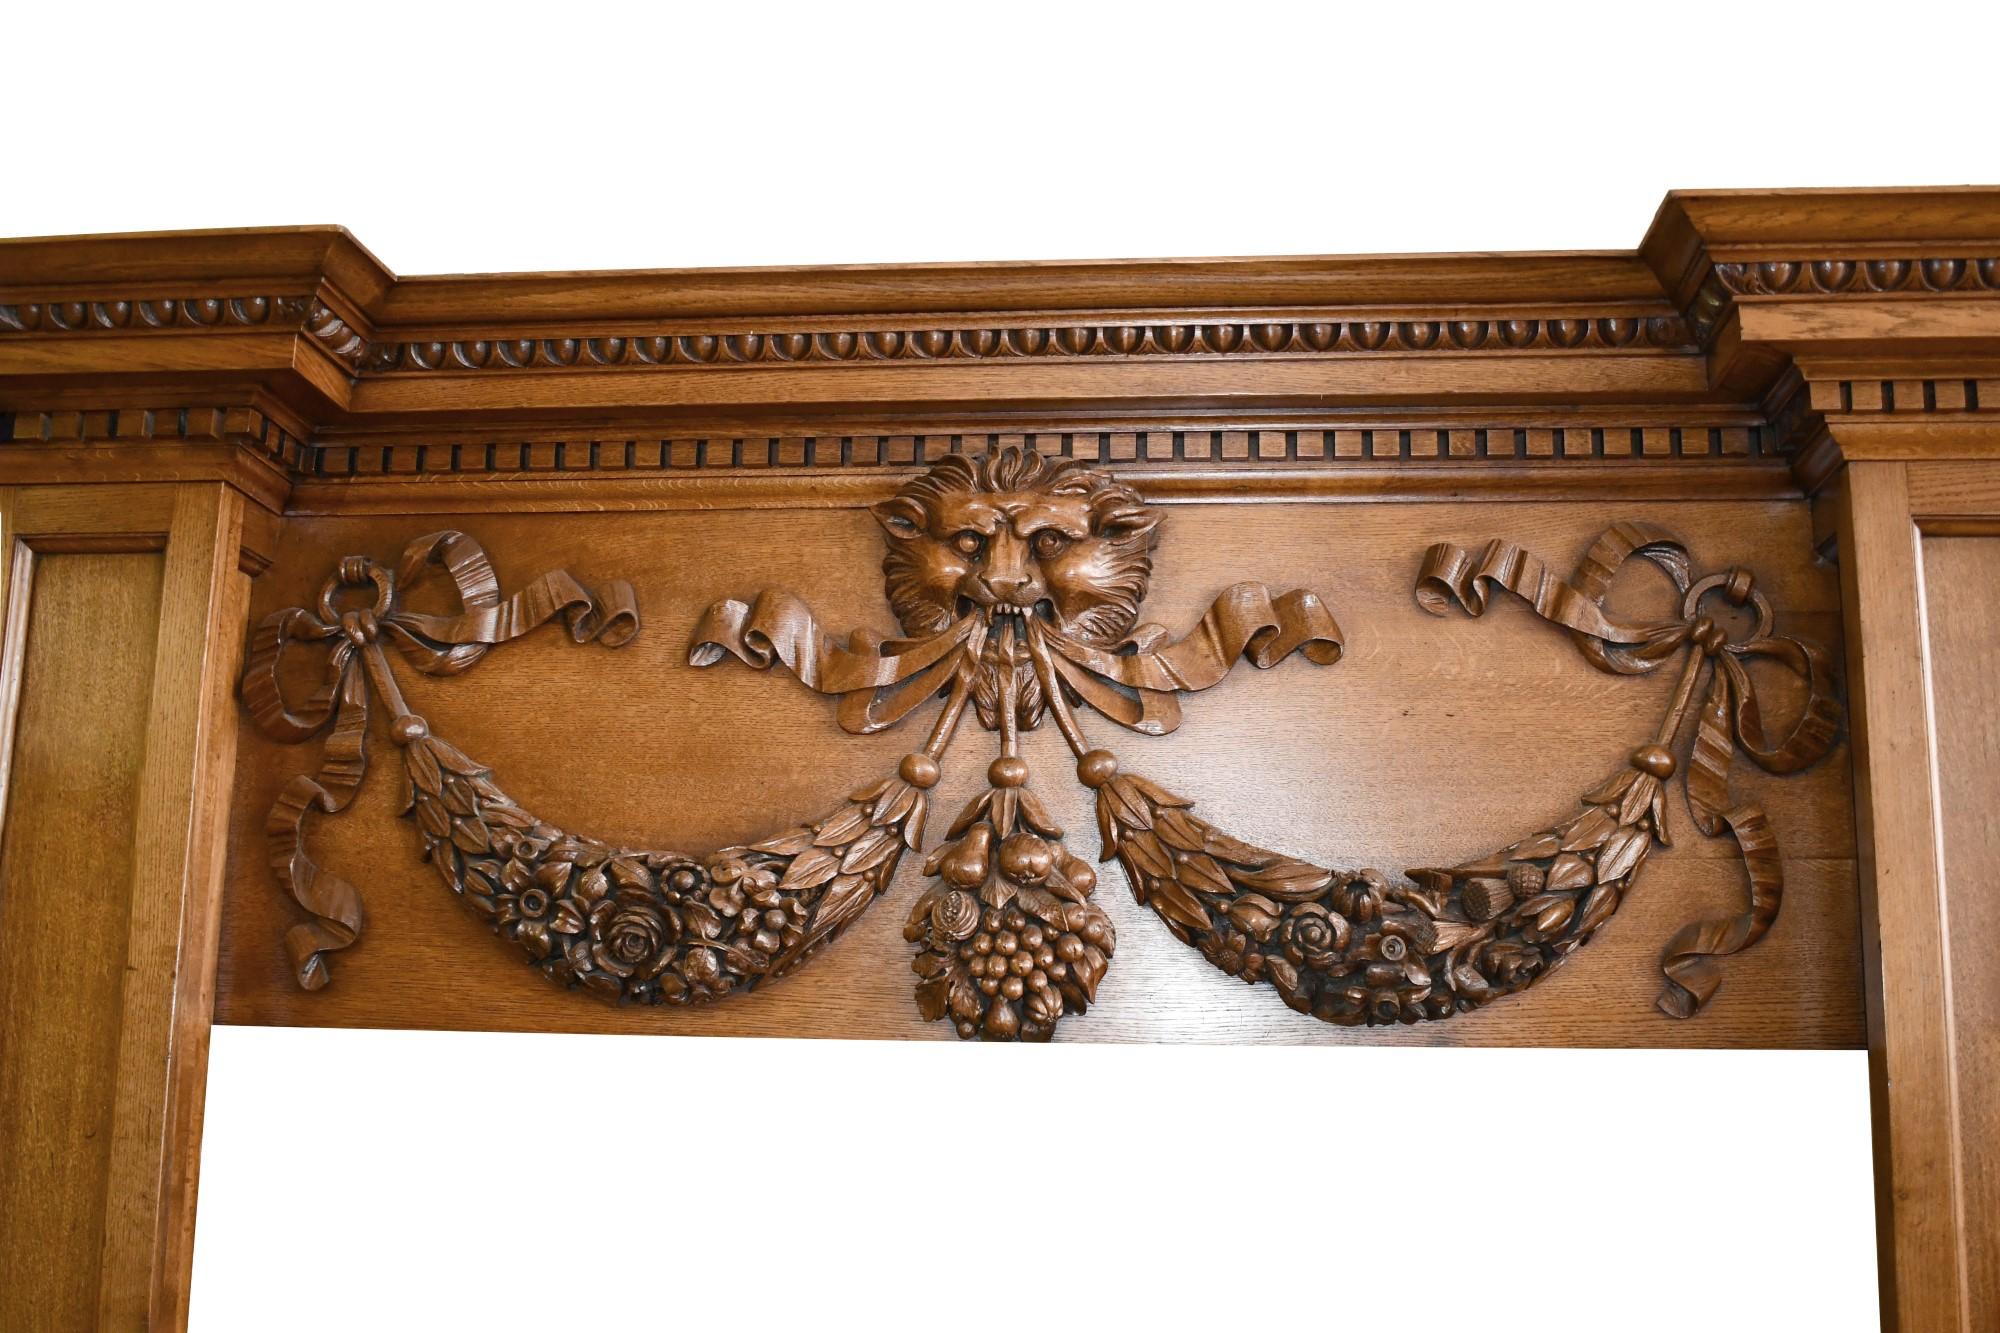 English Regency style oak mantel. Very large mantel, but not overly done, from the 1800s. It has a center lion motif with ribbon and swag details. Please note, this item is located in our Scranton, PA location.